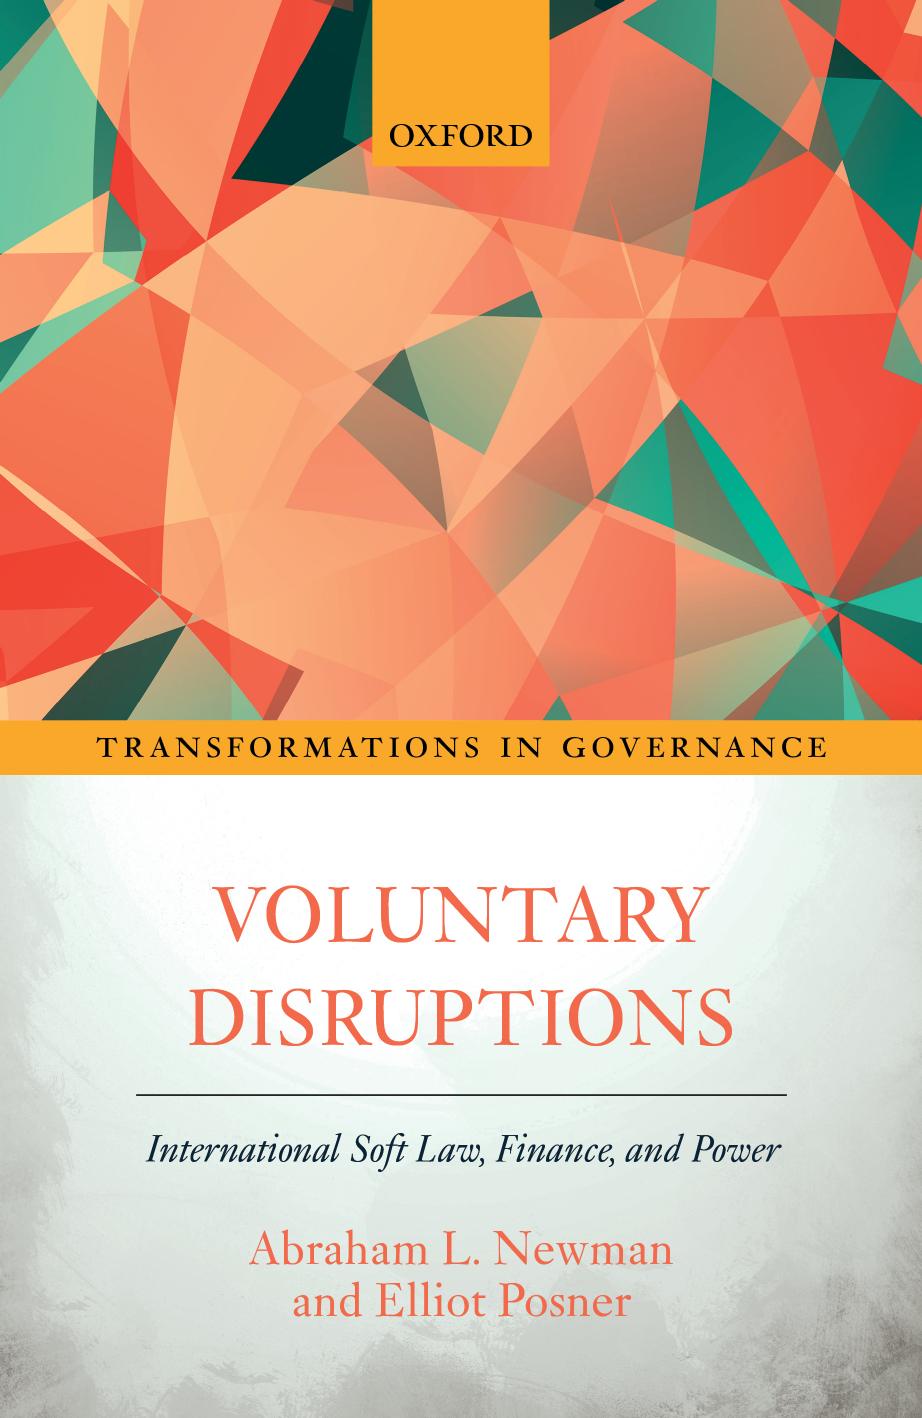 Voluntary Disruptions: International Soft Law, Finance, and Power by Abraham Newman; Elliot Posner